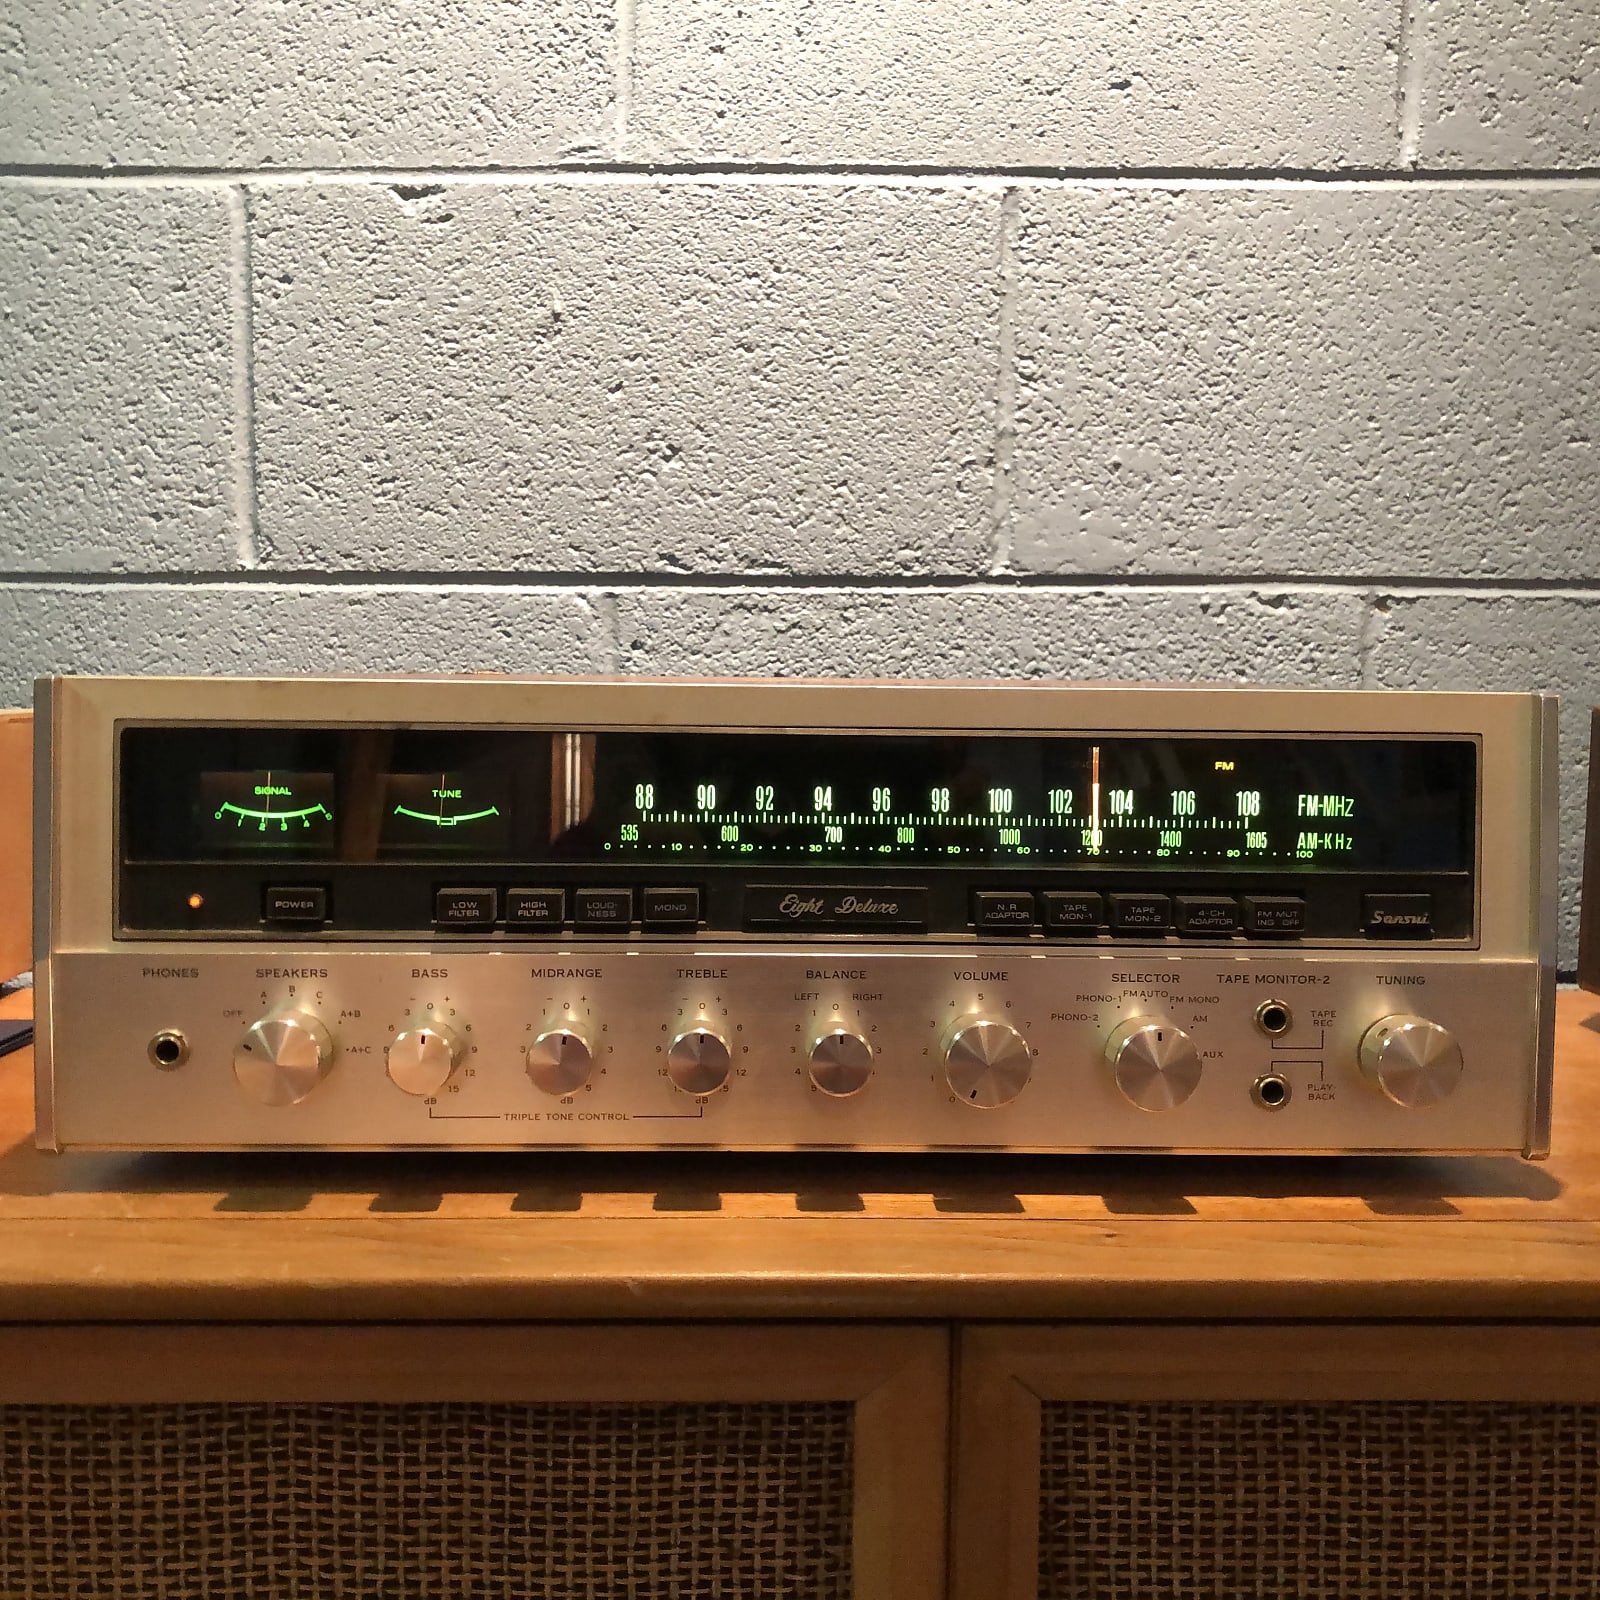 Sansui Eight Deluxe Stereo Receiver | Reverb